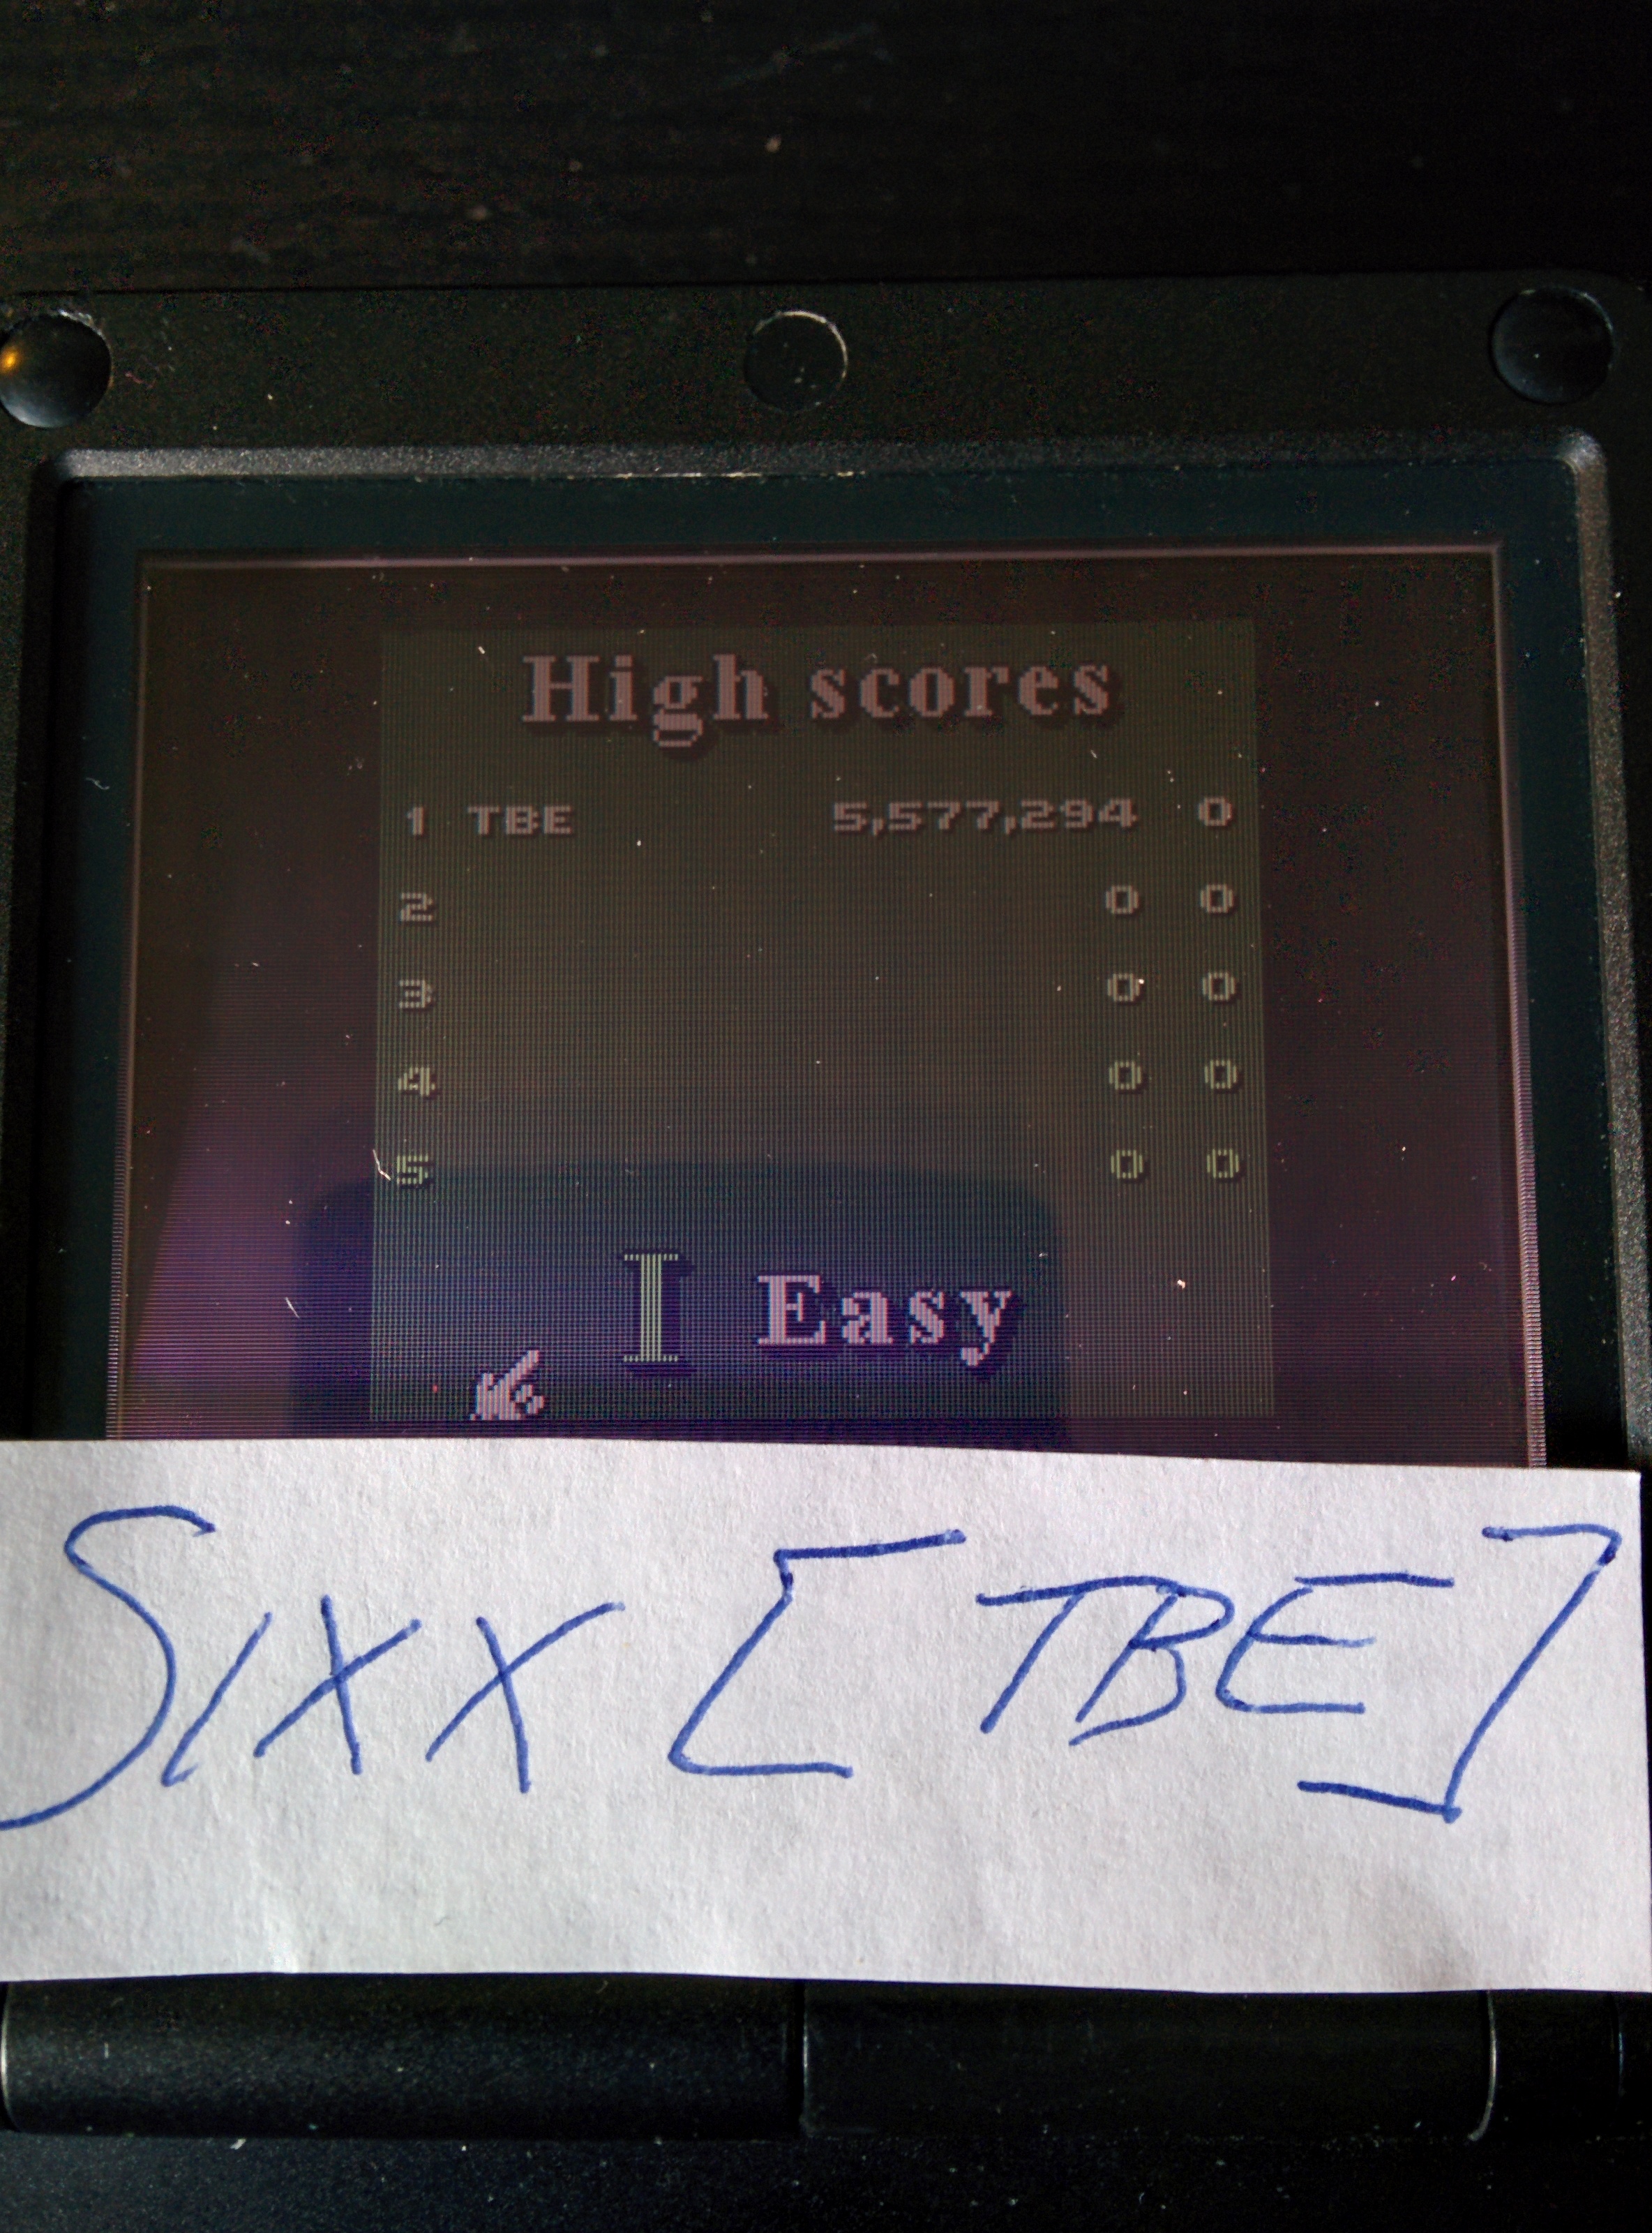 Sixx: 3D Ultra Pinball Thrillride: Easy (Game Boy Color) 5,577,294 points on 2014-08-18 11:38:01